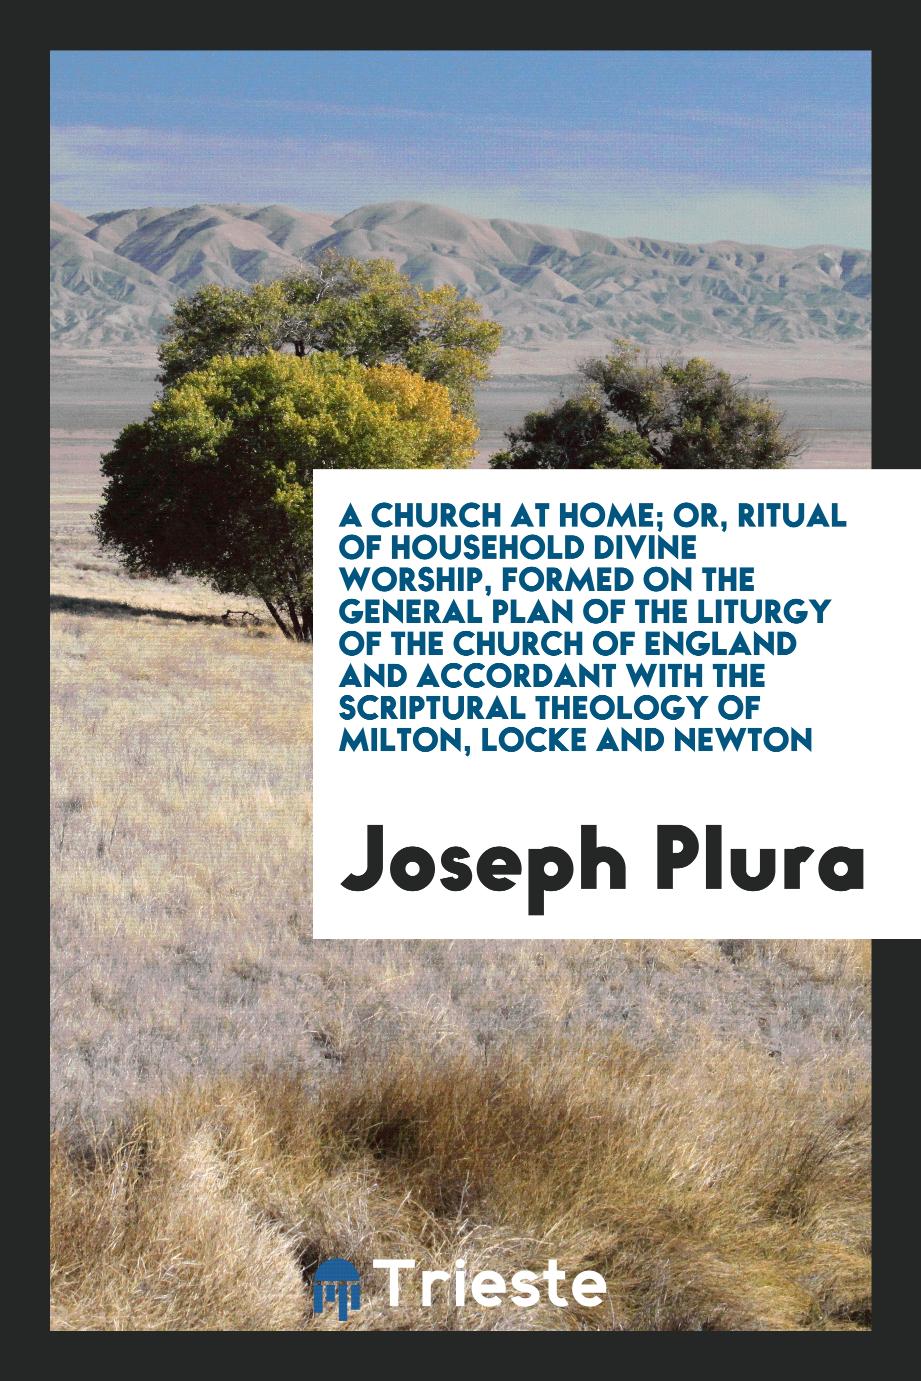 Joseph Plura - A Church at Home; Or, Ritual of Household Divine Worship, Formed on the General Plan of the Liturgy of the Church of England and Accordant with the Scriptural Theology of Milton, Locke and Newton